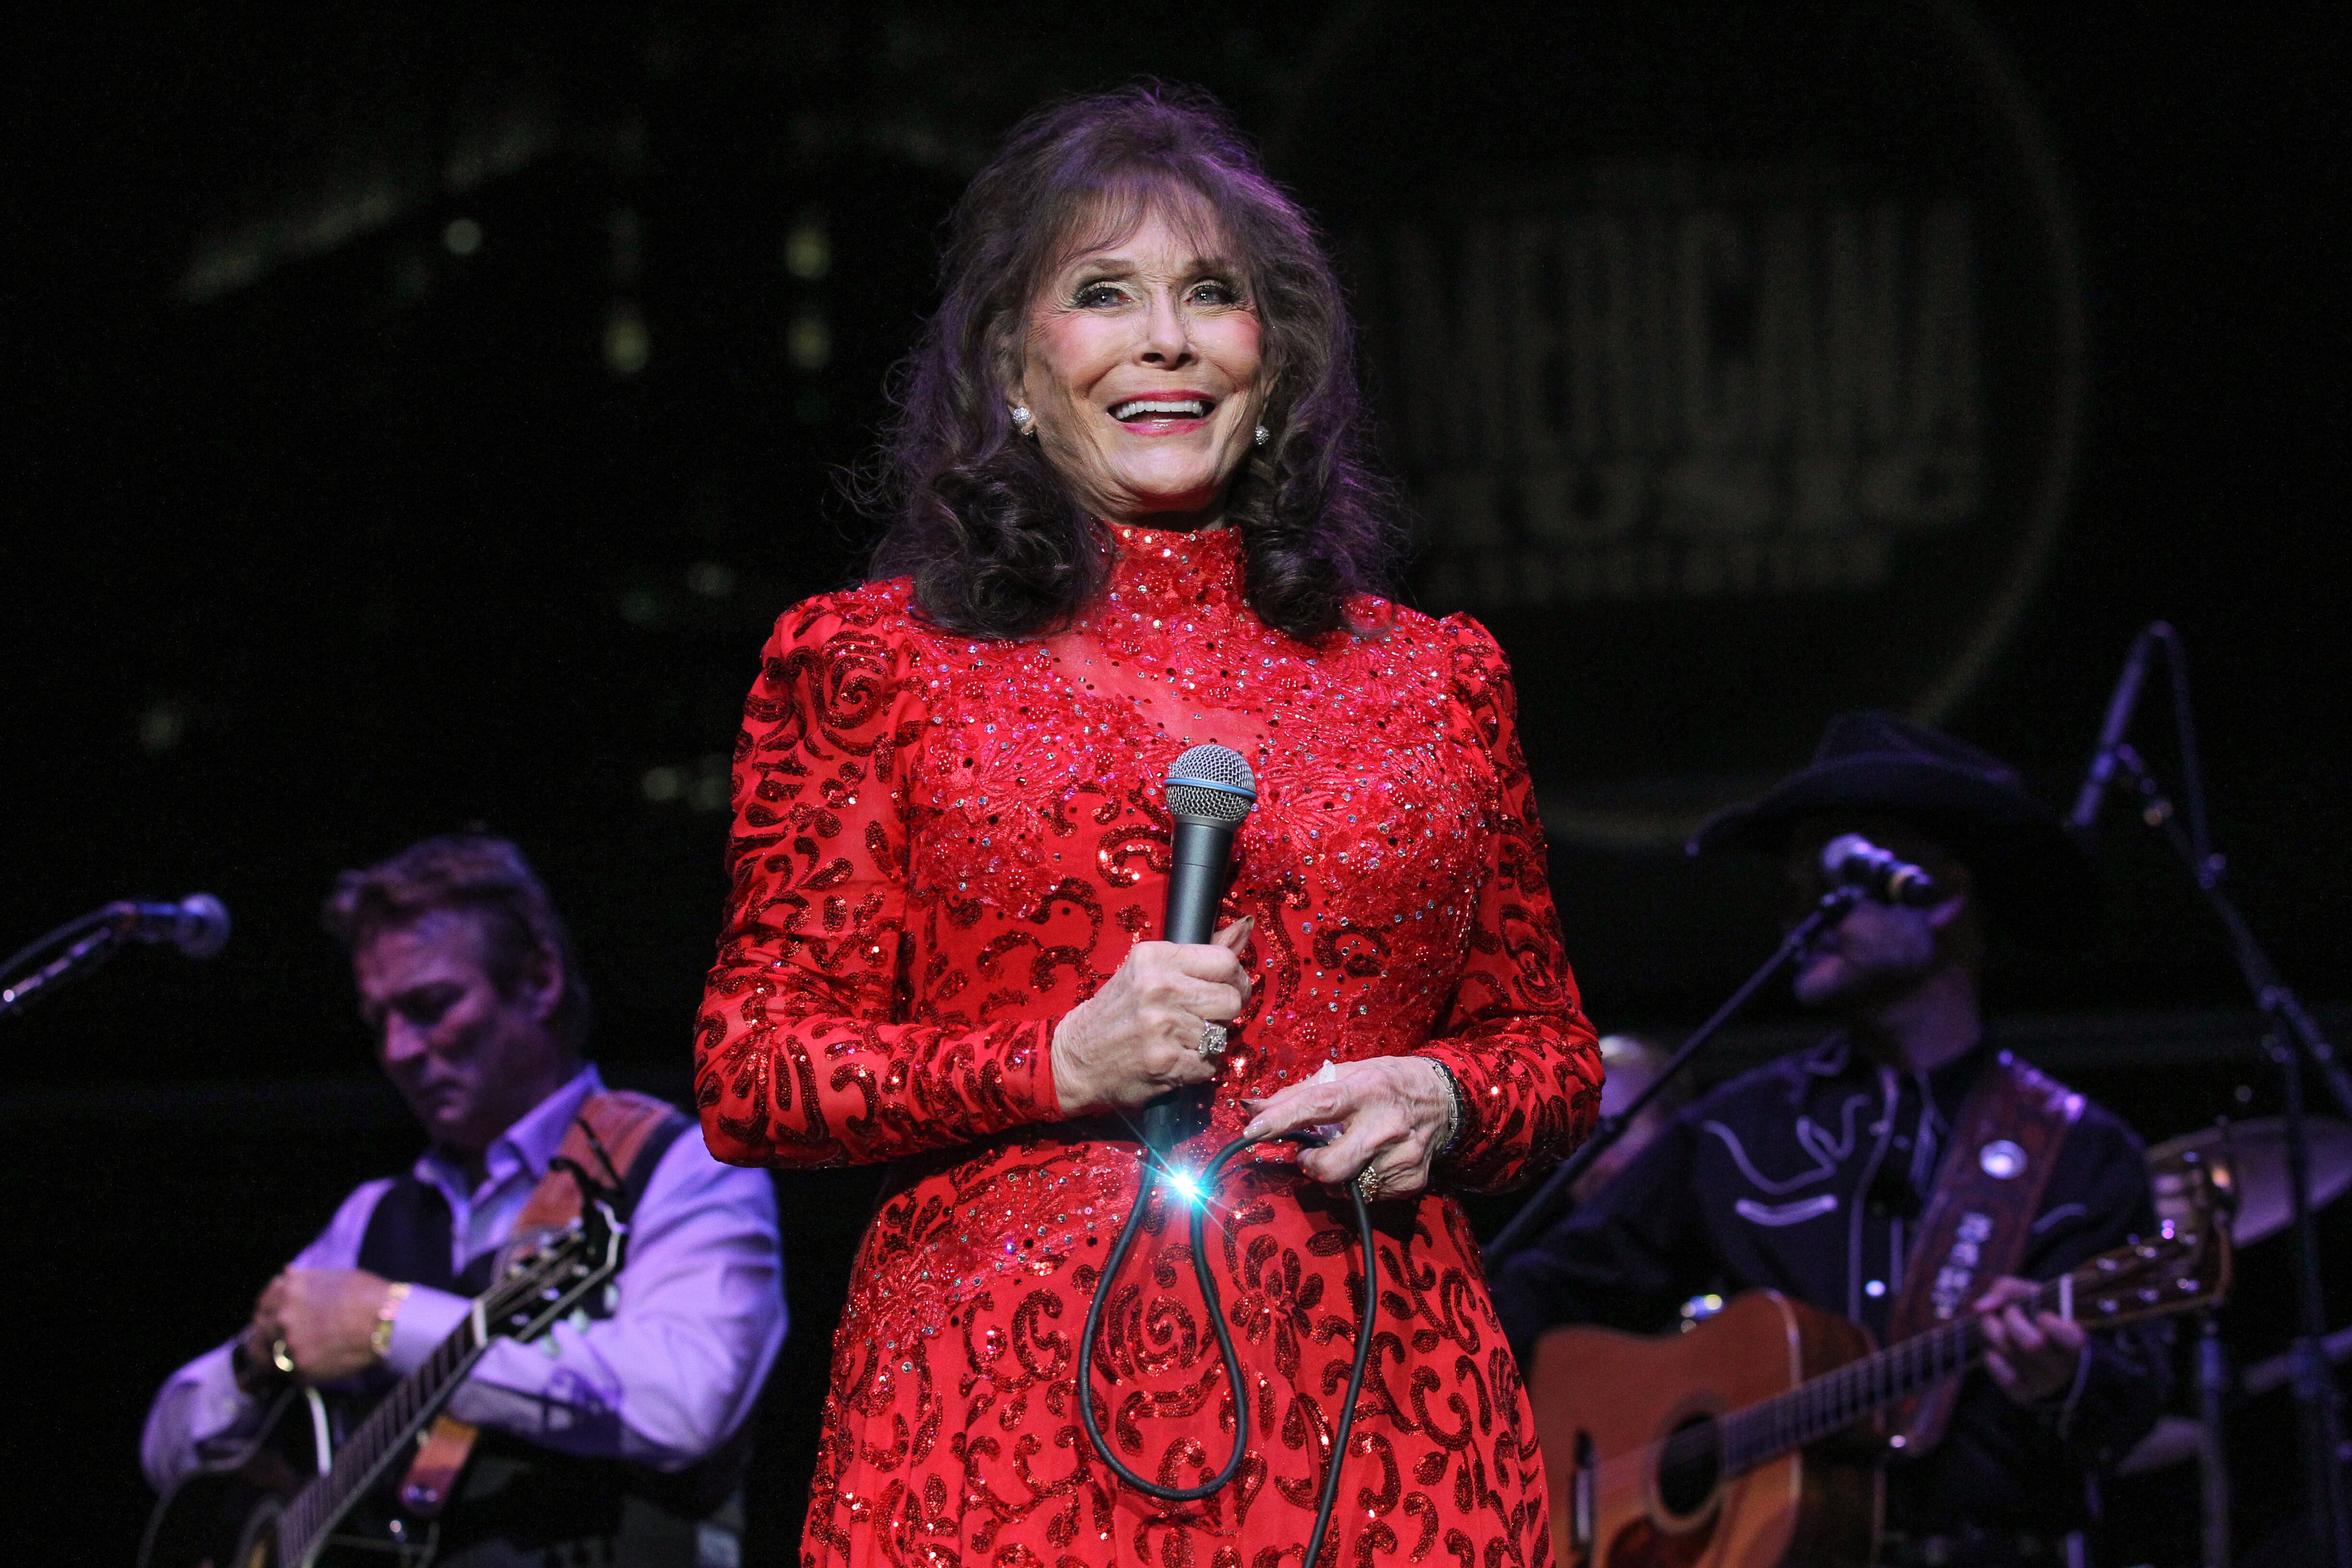 Loretta Lynn at the 16th Annual Americana Music Festival on September 19, 2015 in Nashville, Tennessee. | Source: Getty Images